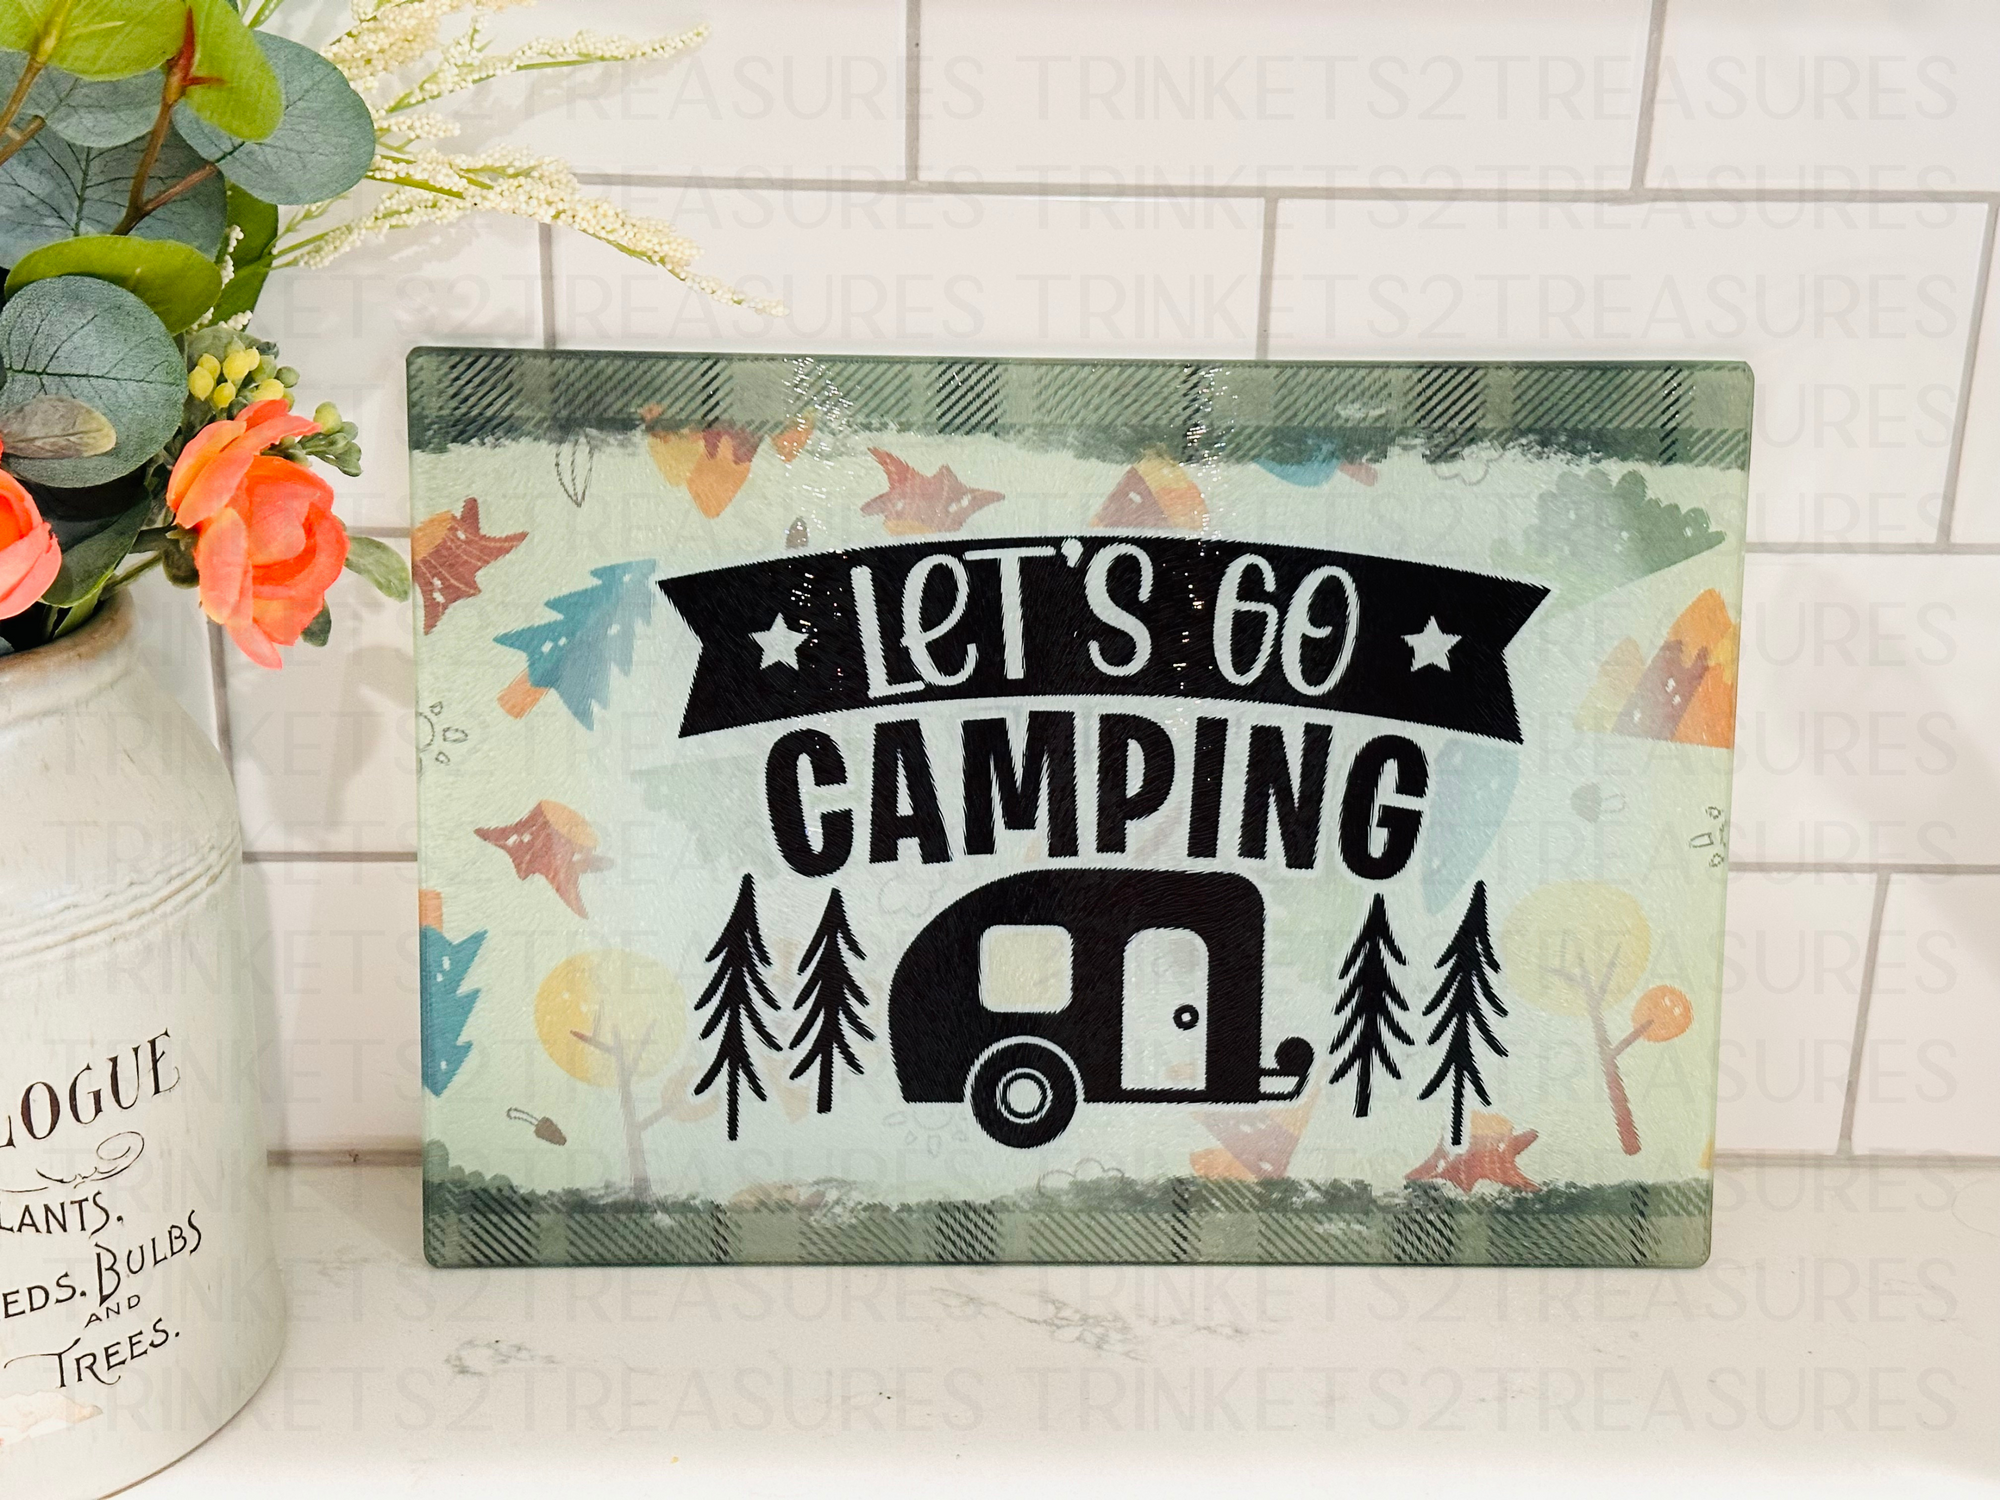 Personalized 8" x 11" Textured & Tempered Glass Cutting Board/Let's Go Camping/#611